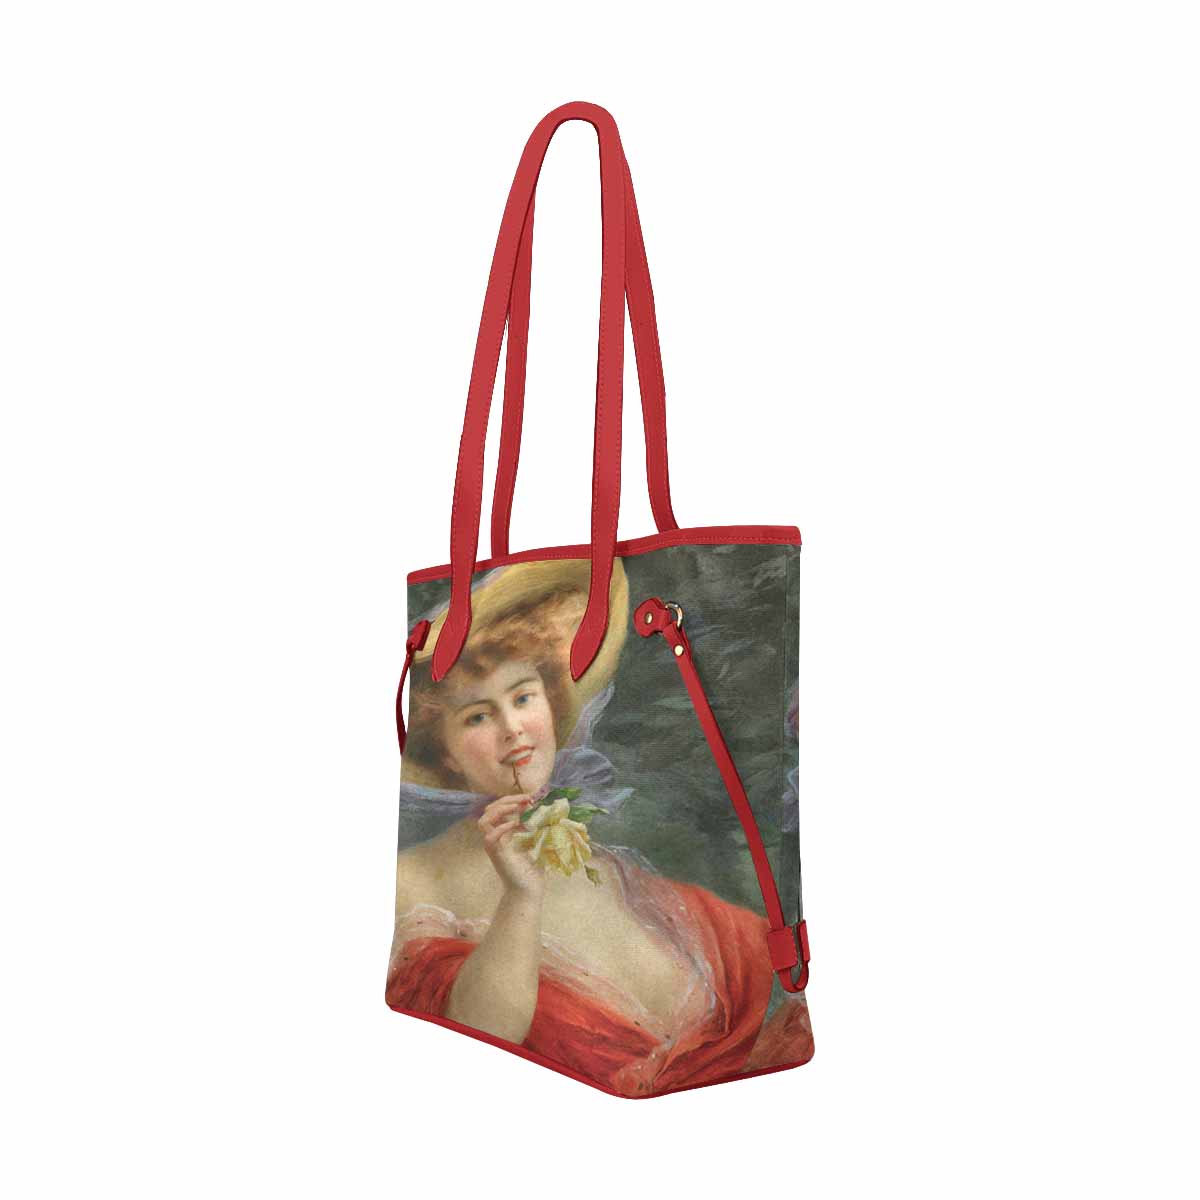 Victorian Lady Design Handbag, Model 1695361, Young Girl With A Rose, RED TRIM